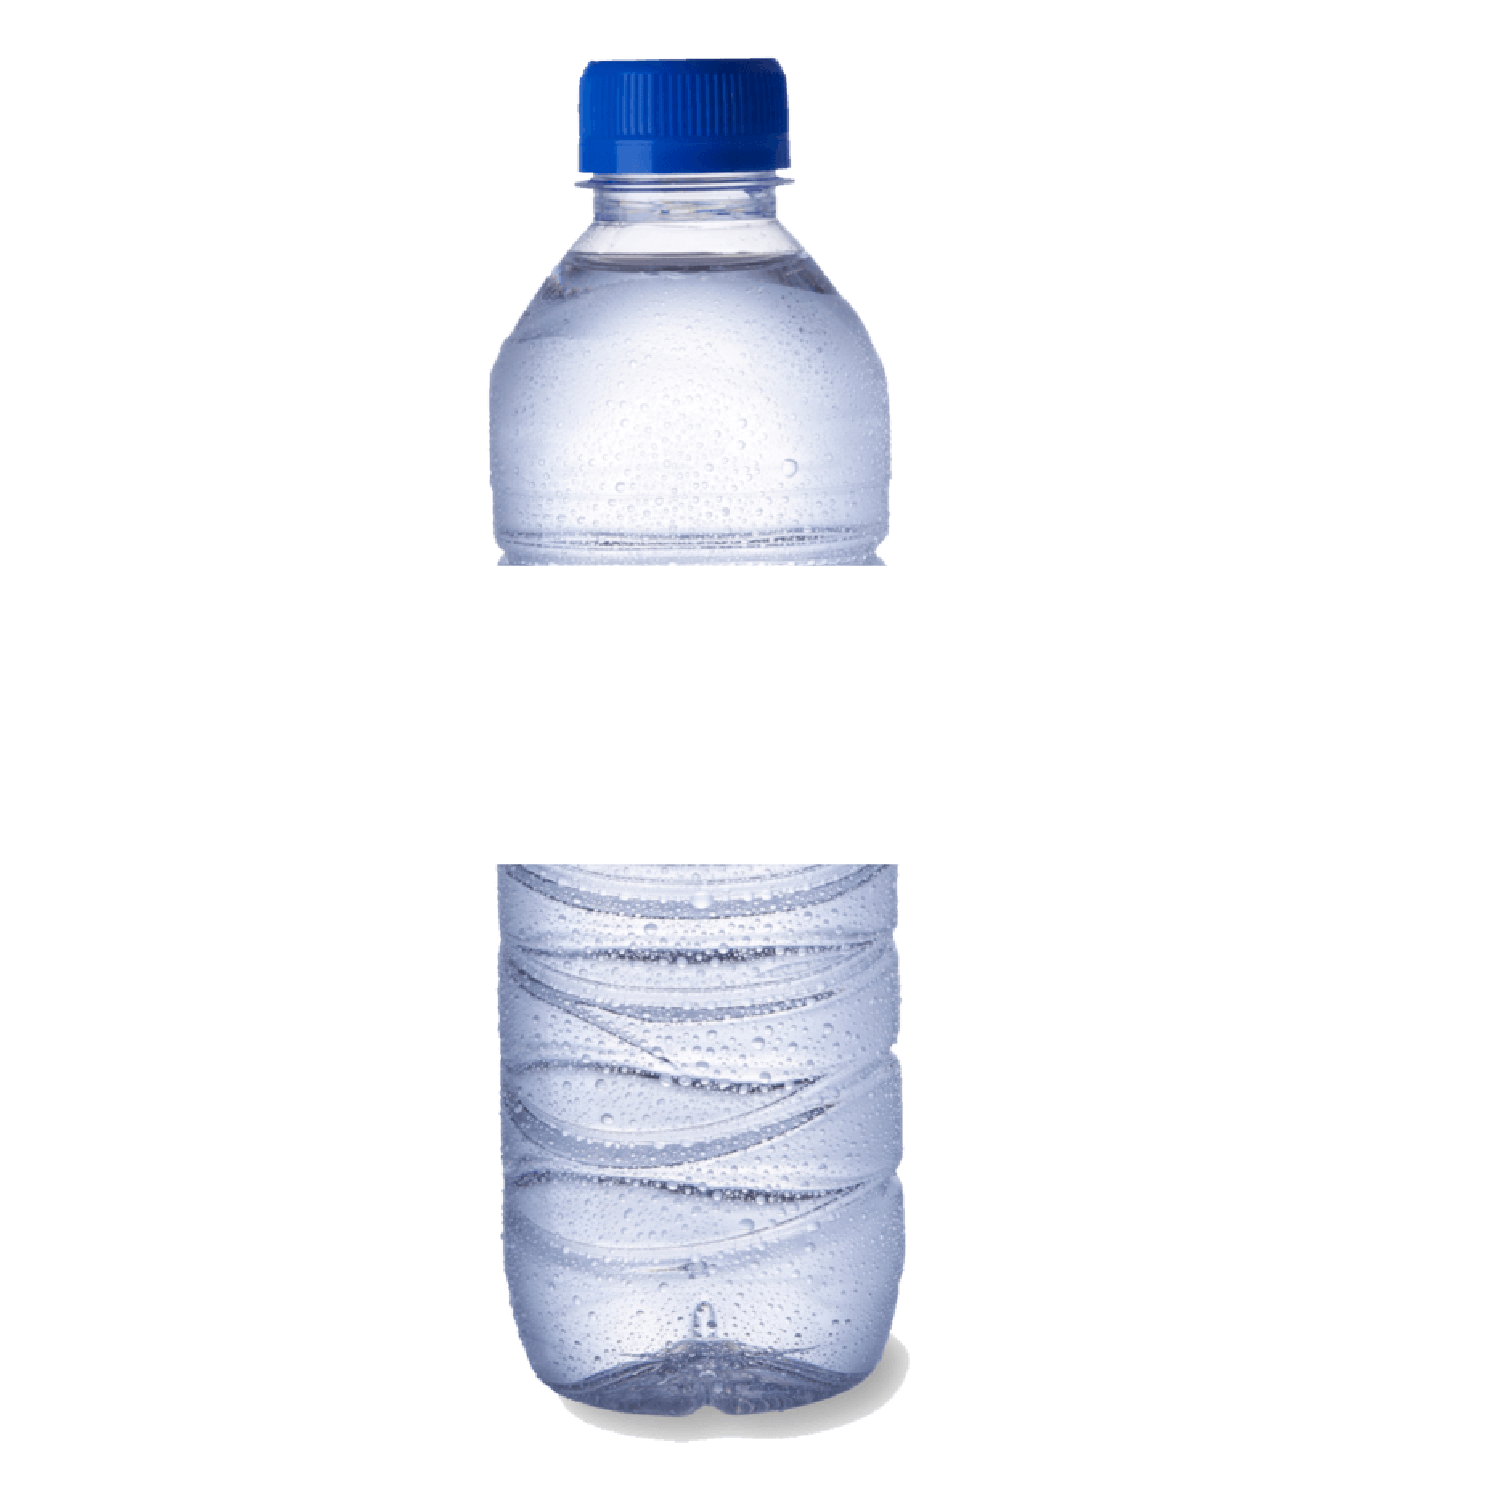 waterbottle labels – The Essential Market